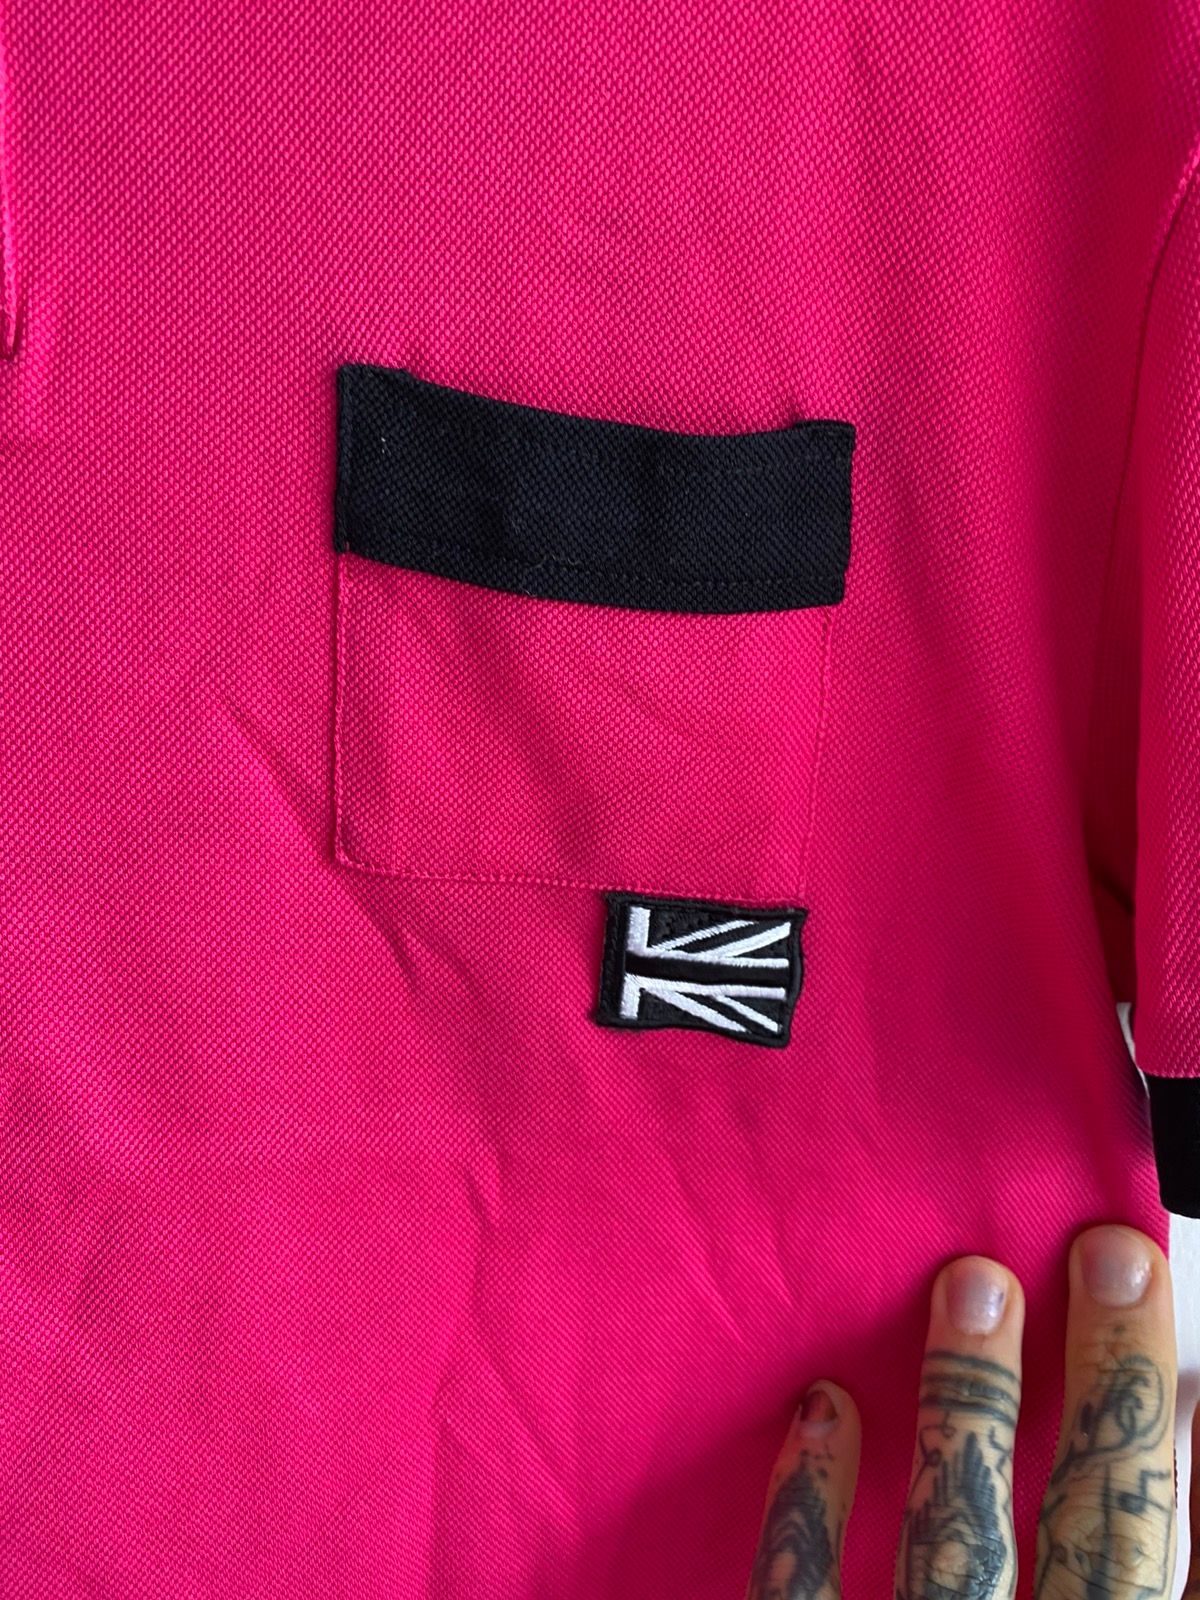 Dior Homme 06 ‘UNION JACK’ Pete Doherty Polo shirt